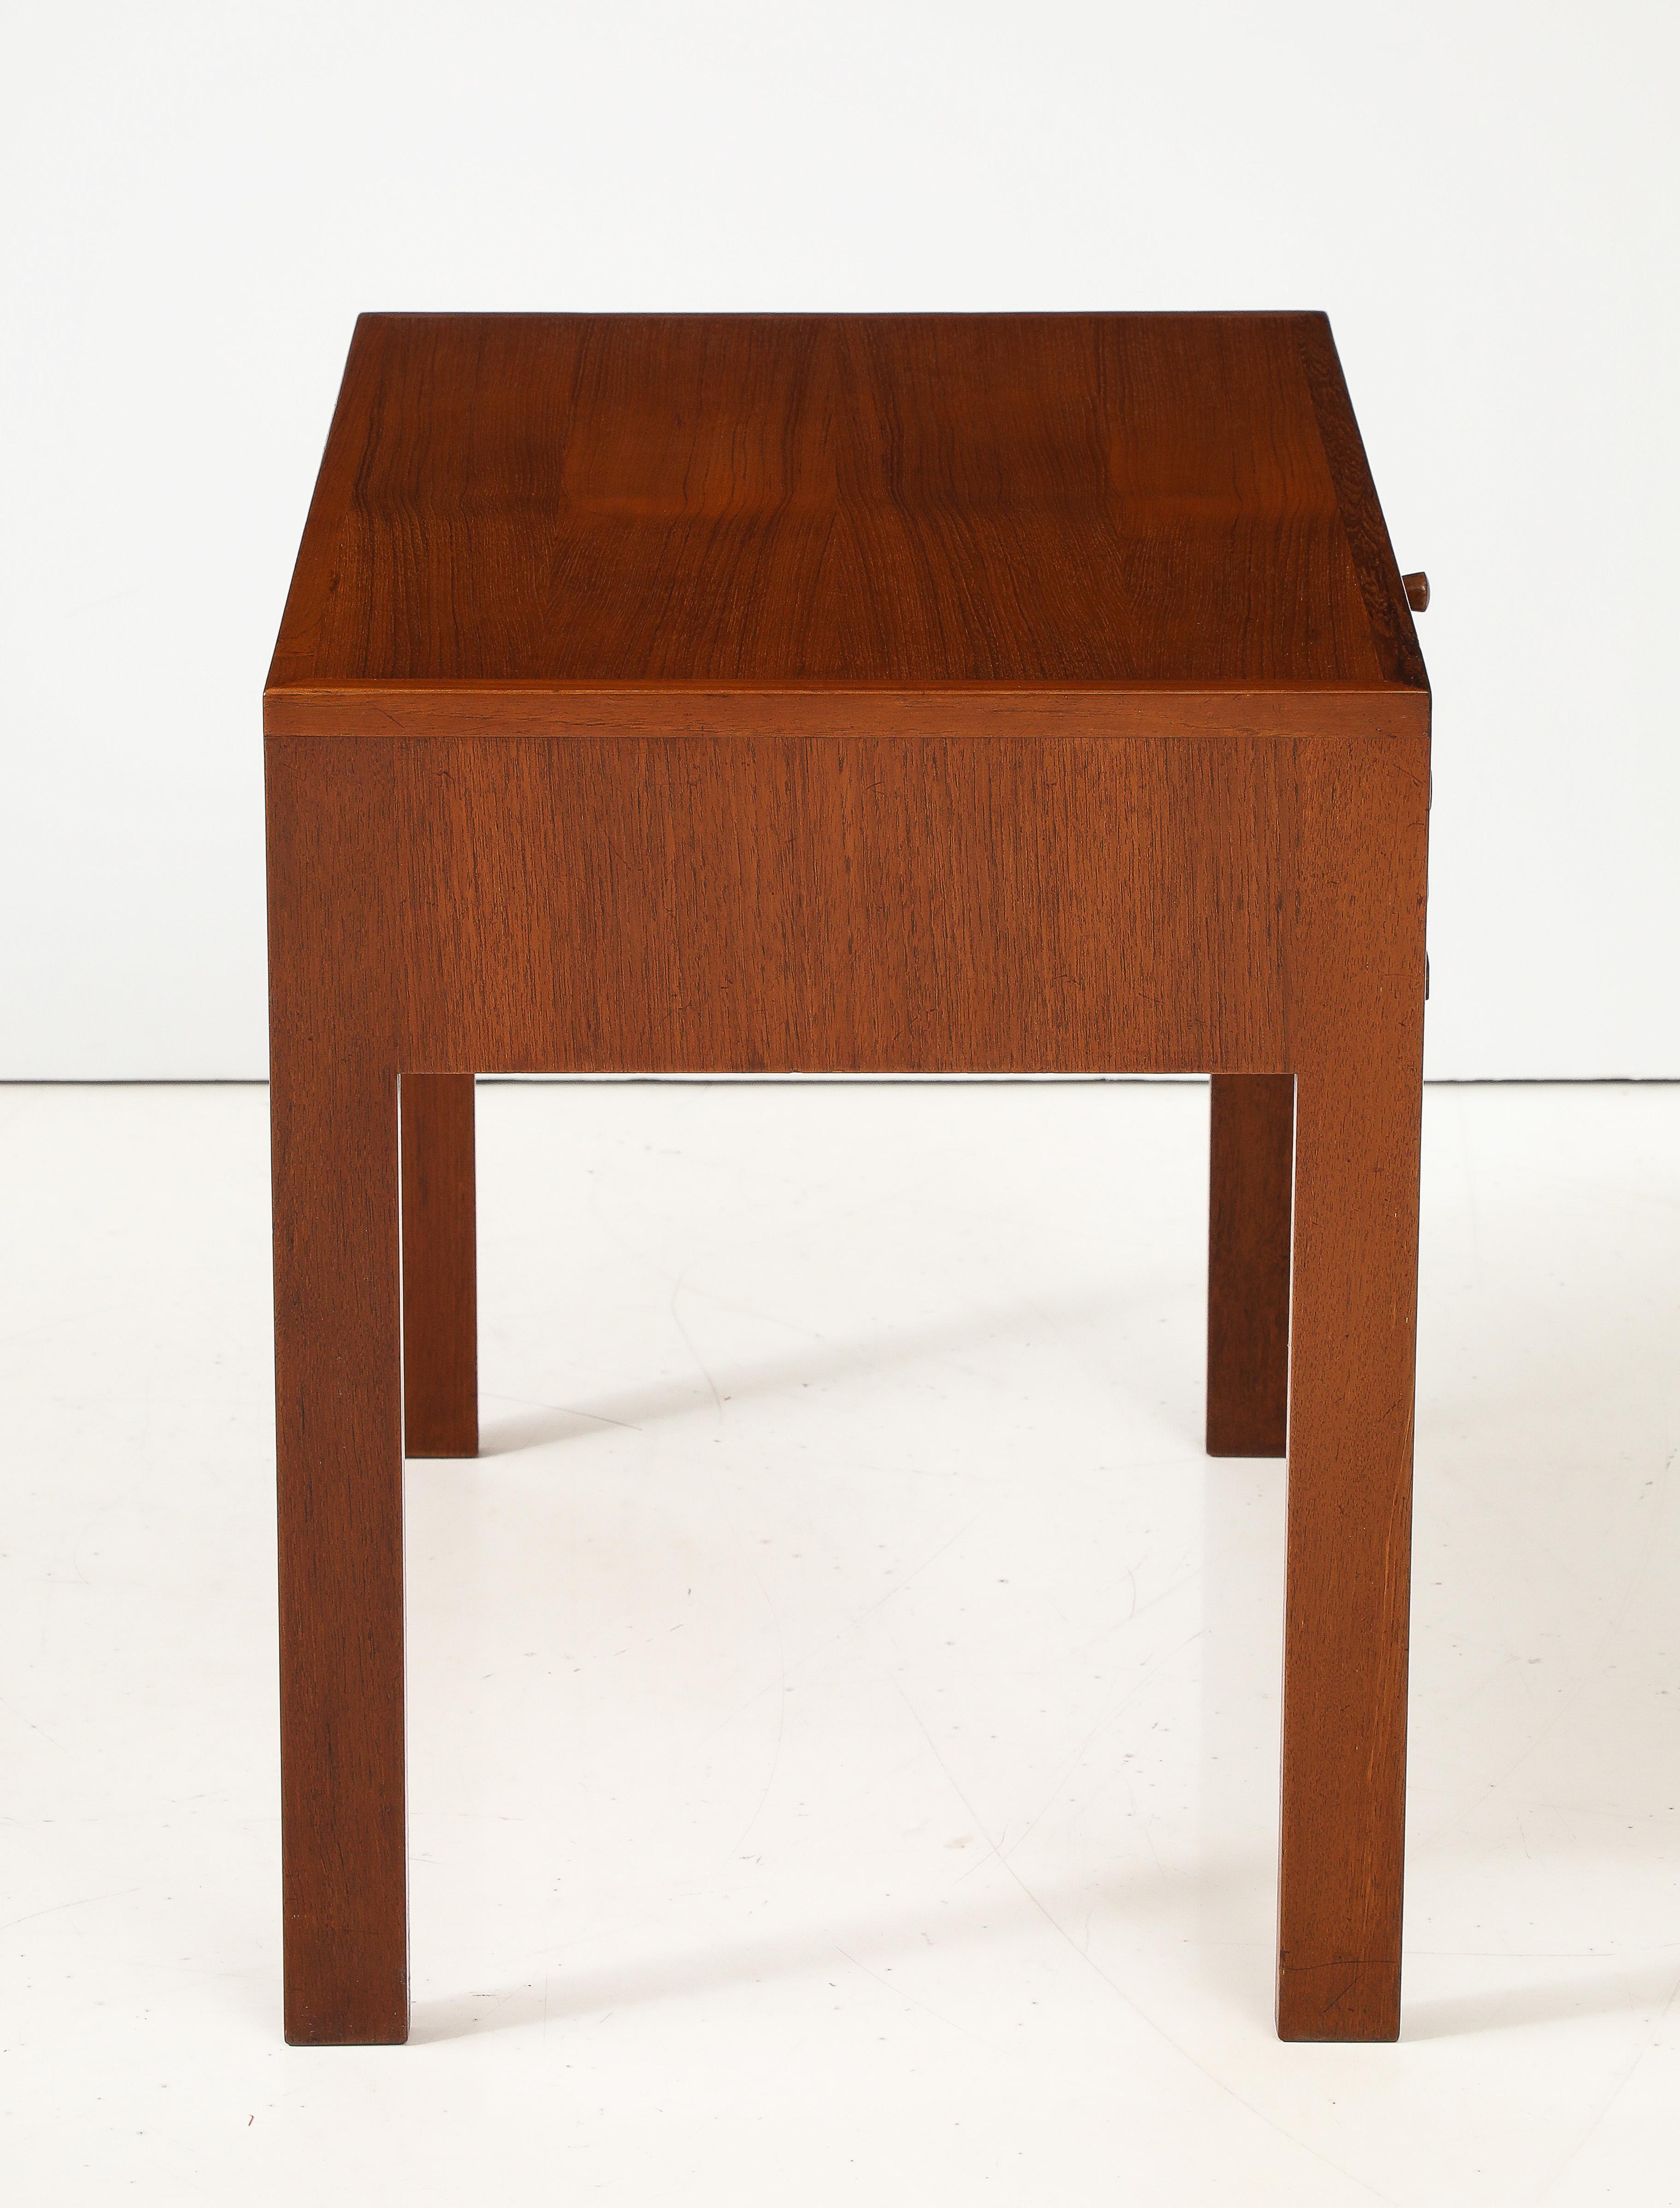 1960's mid-century modern set of 3 folding teak side tables that nest inside side table designed by Illum, Wikkelso, fully restored with minor wear and patina due to age and use.

Side tables measurements: width 16.75 depth 14.25 height 17.25  